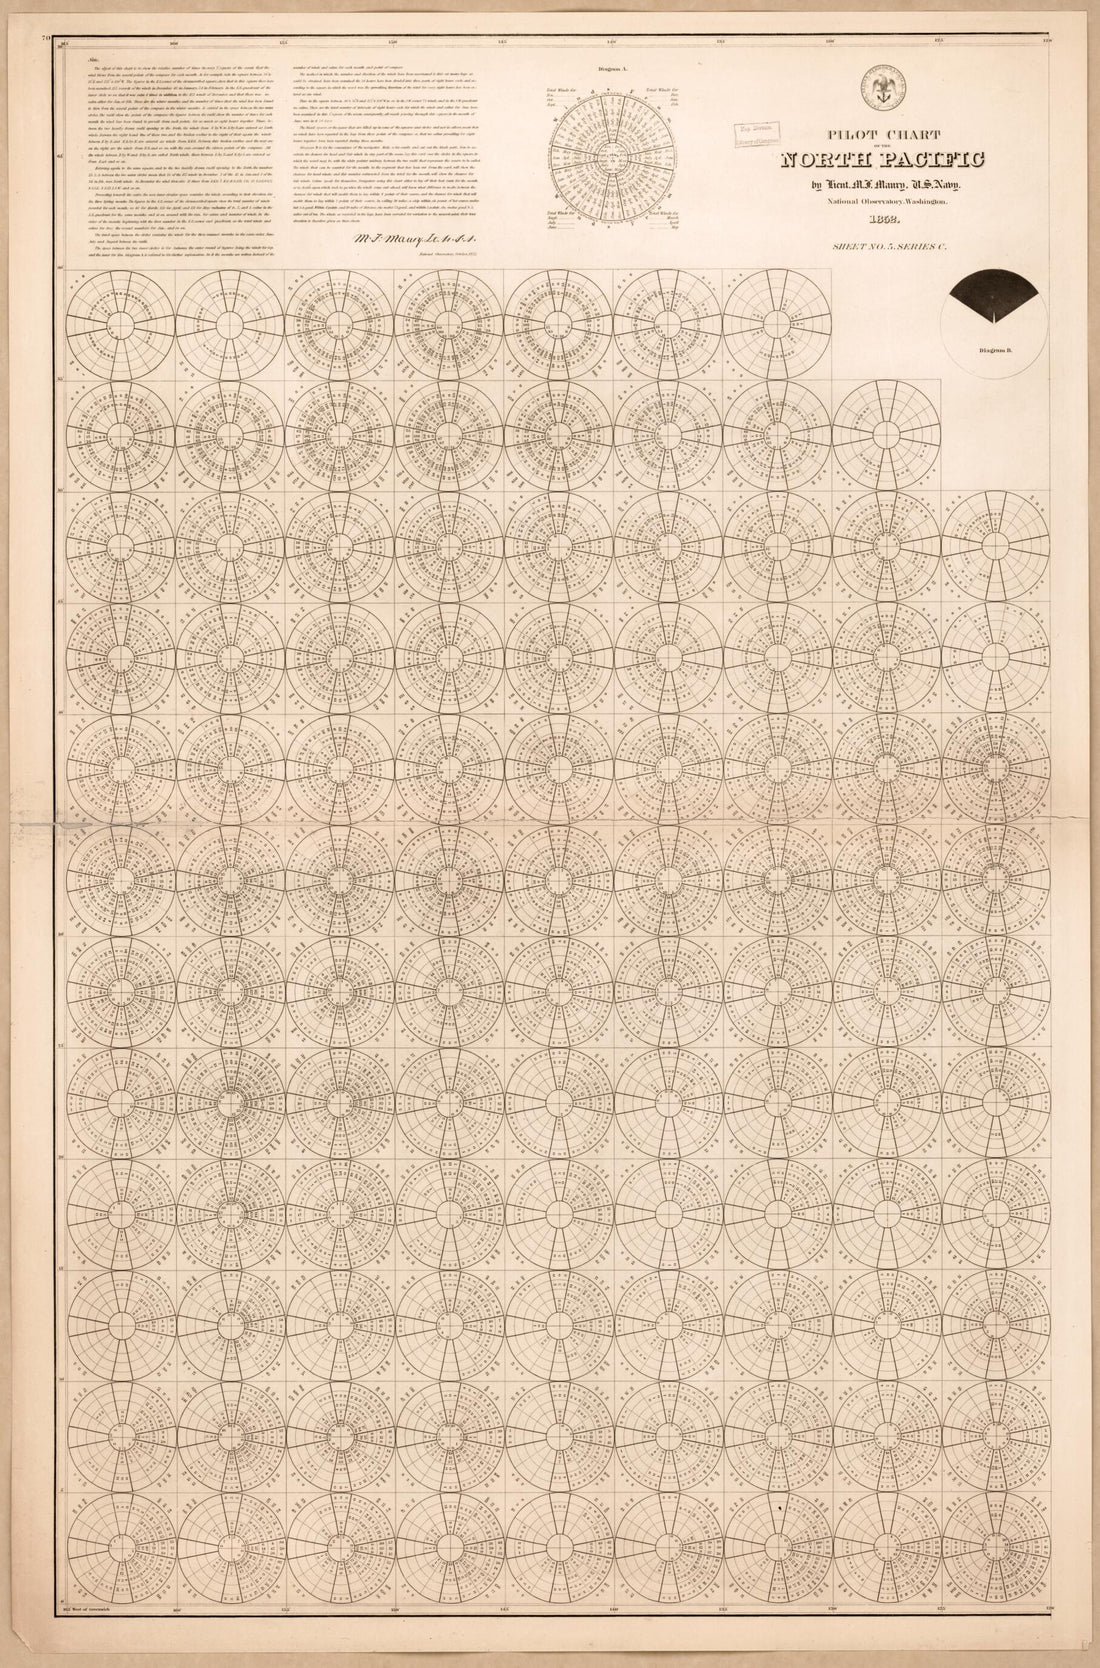 This old map of Pilot Chart of the North Pacific (North Pacific) from 1852 was created by Matthew Fontaine Maury, Charles Morris,  United States Naval Observatory,  United States. Bureau of Ordnance and Hydrography,  United States. Hydrographic Office in